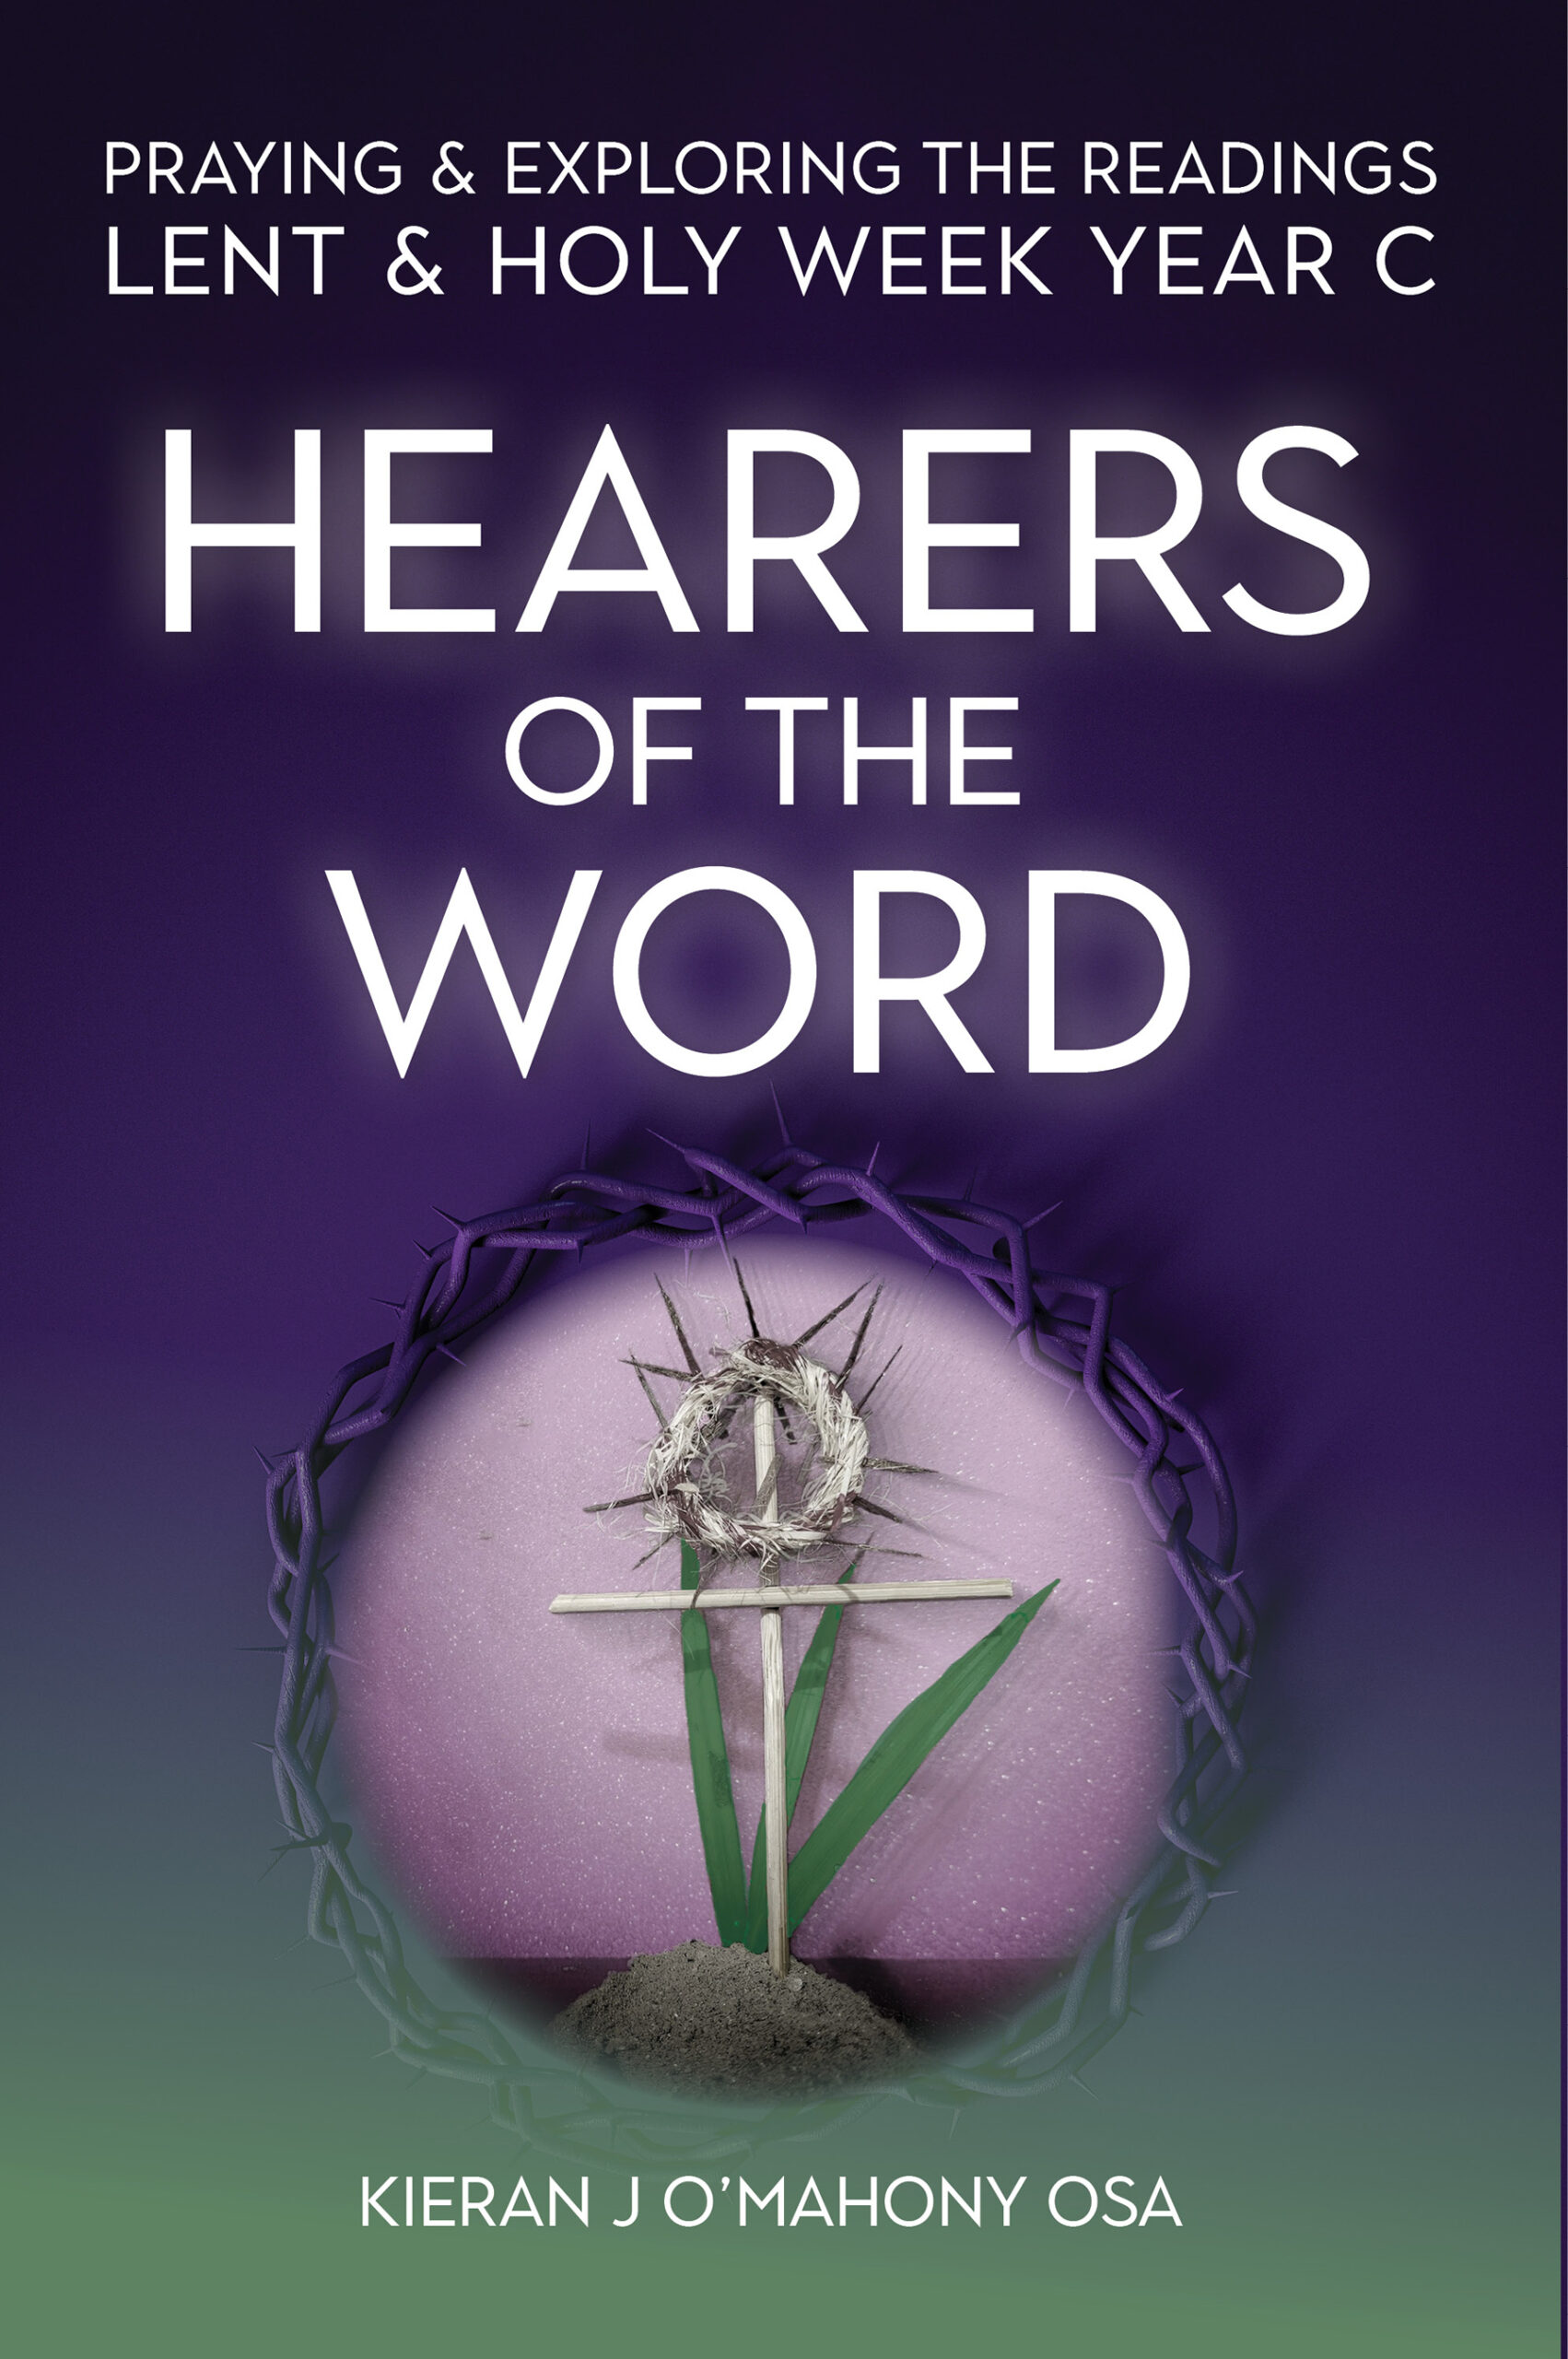 Hearers of the Word: Praying & exploring the readings Lent & Holy Week Year C